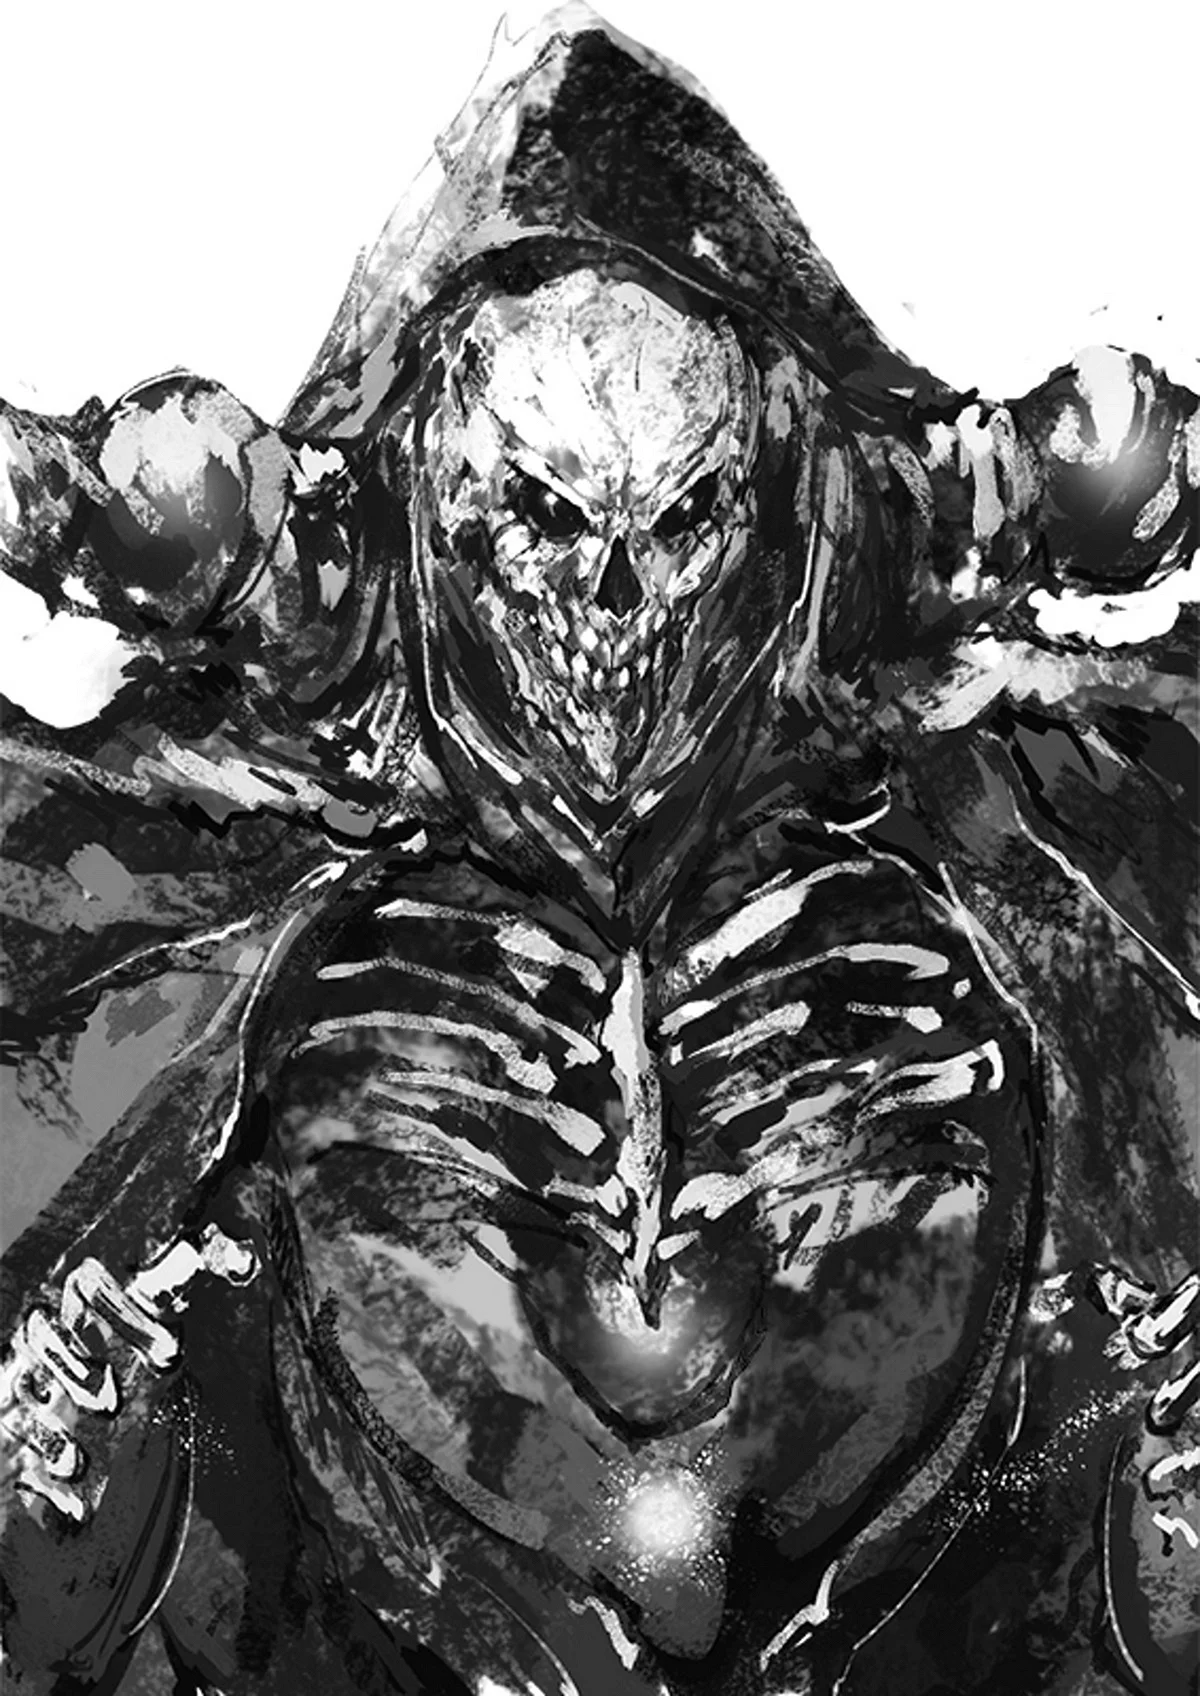 Overlord Wallpaper For iPhone